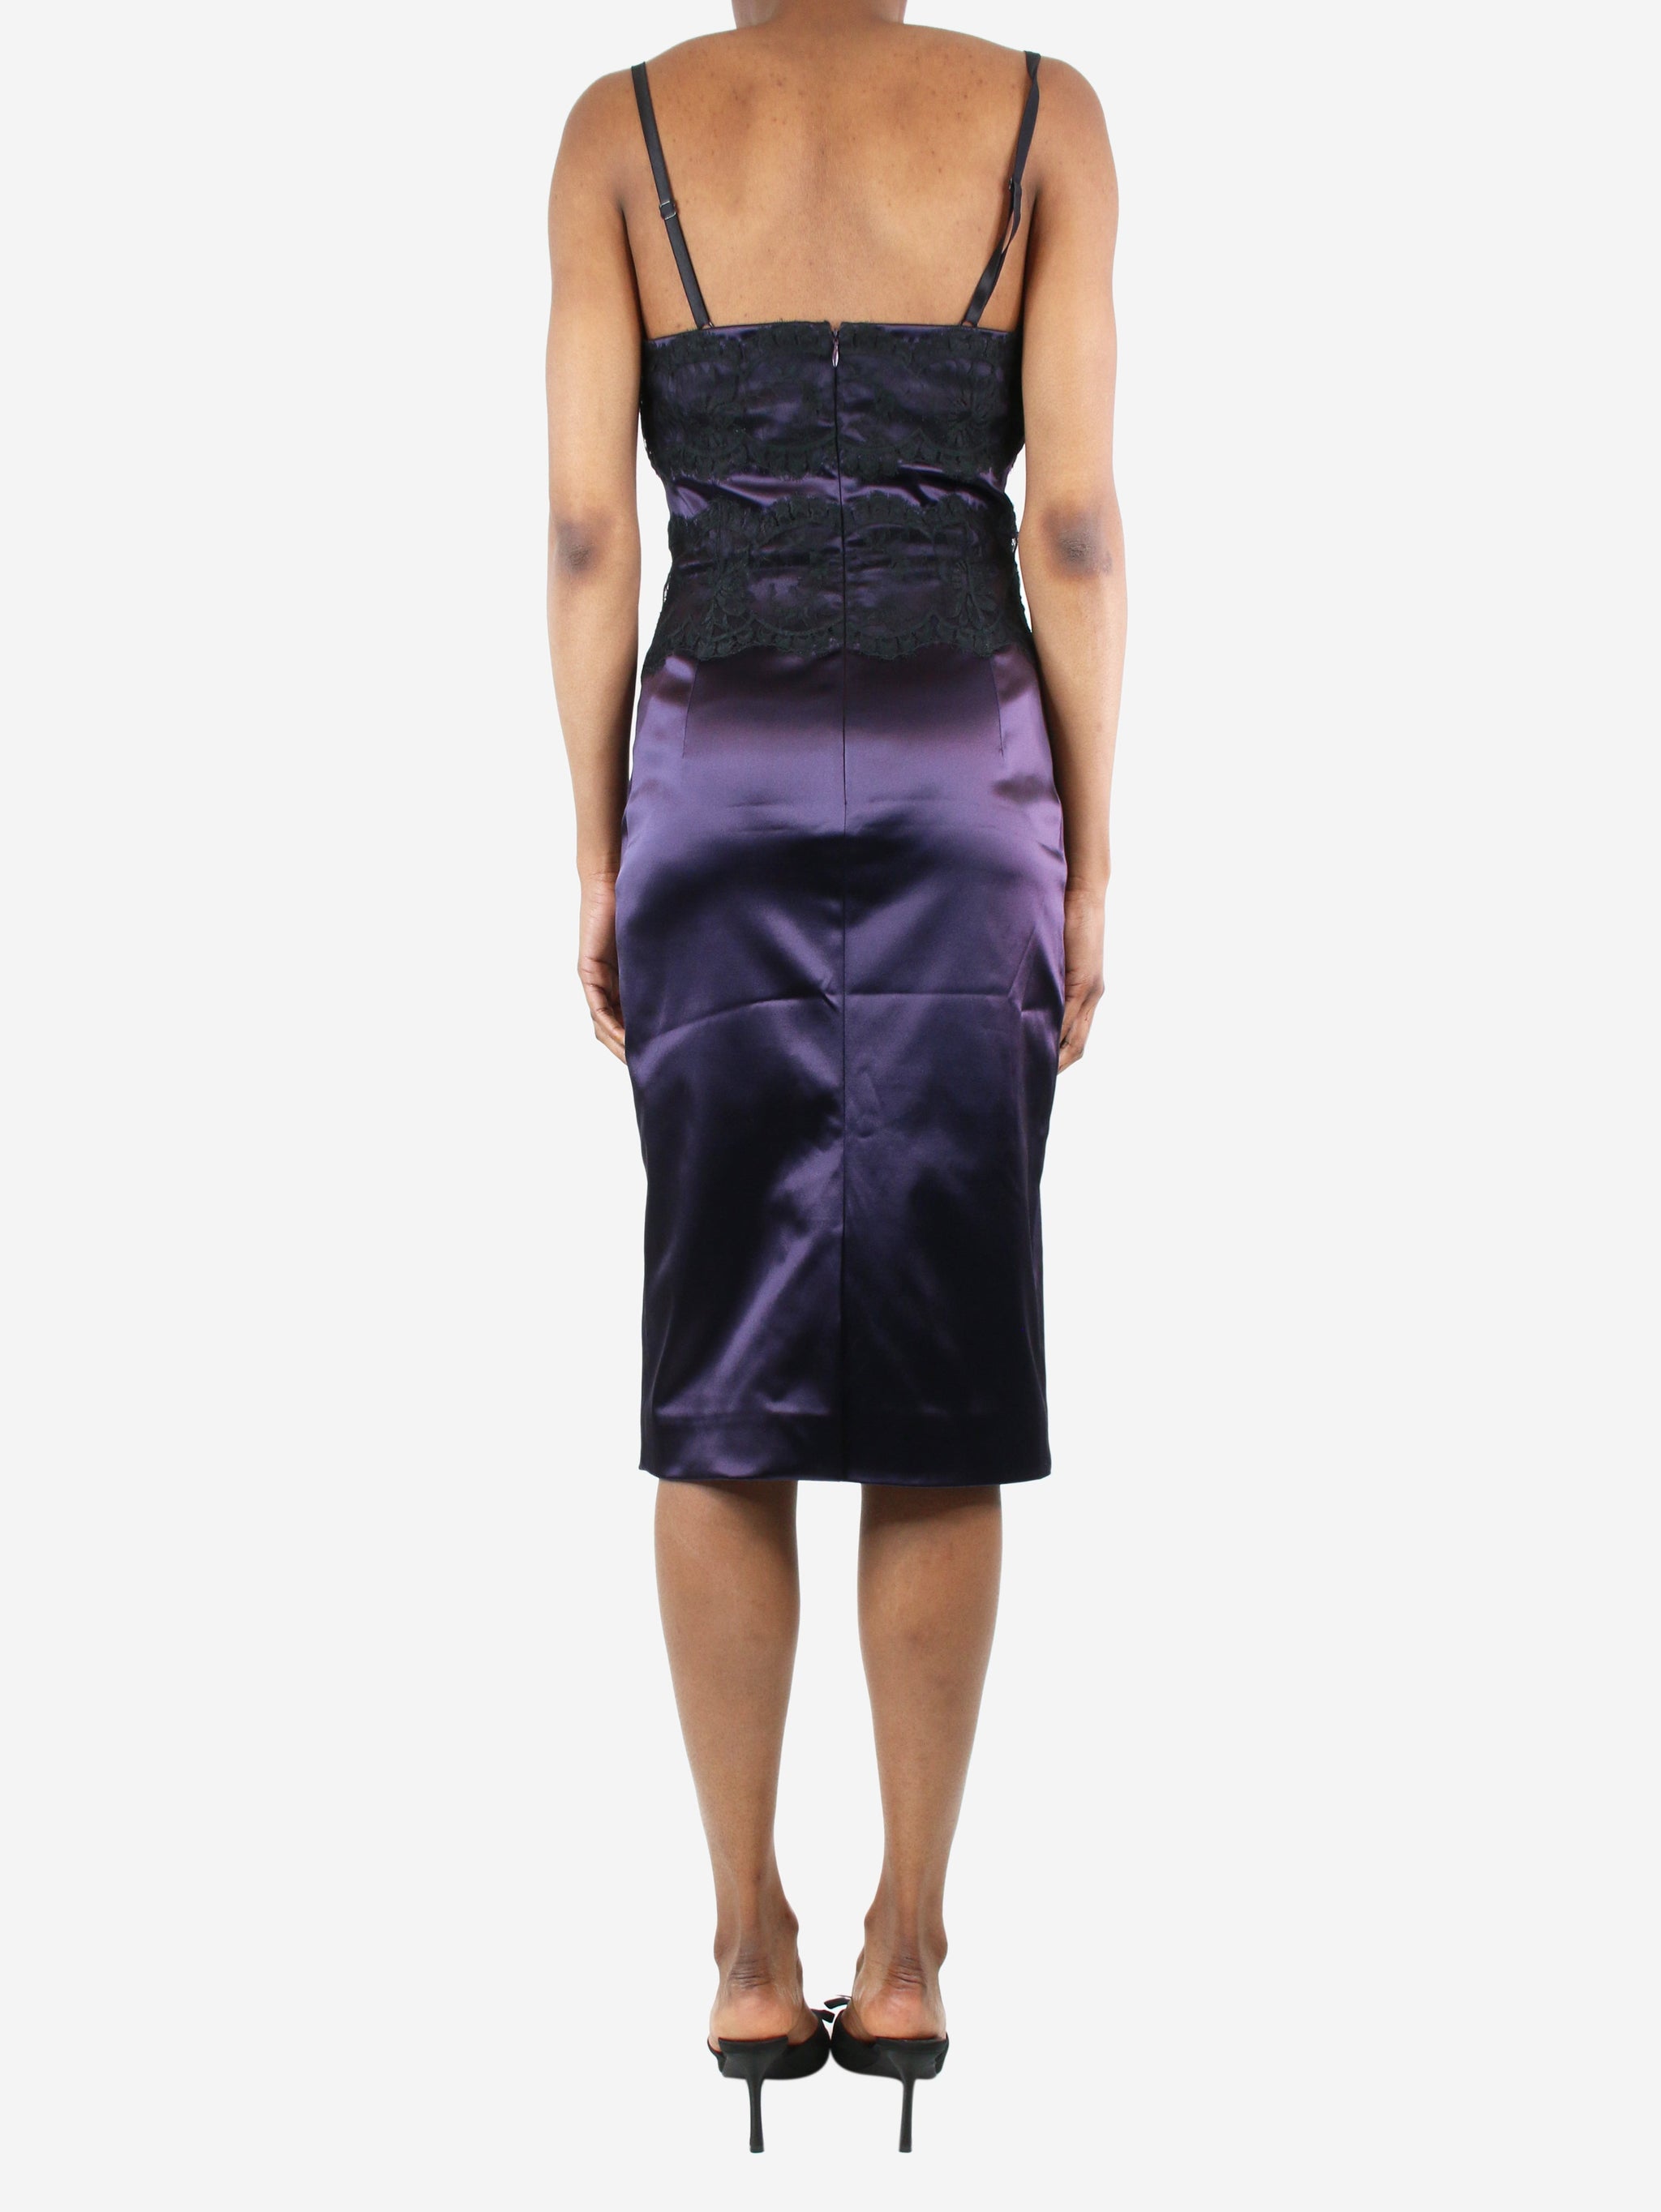 Dolce & Gabbana pre-owned purple lace-trimmed satin dress | Sign of the ...